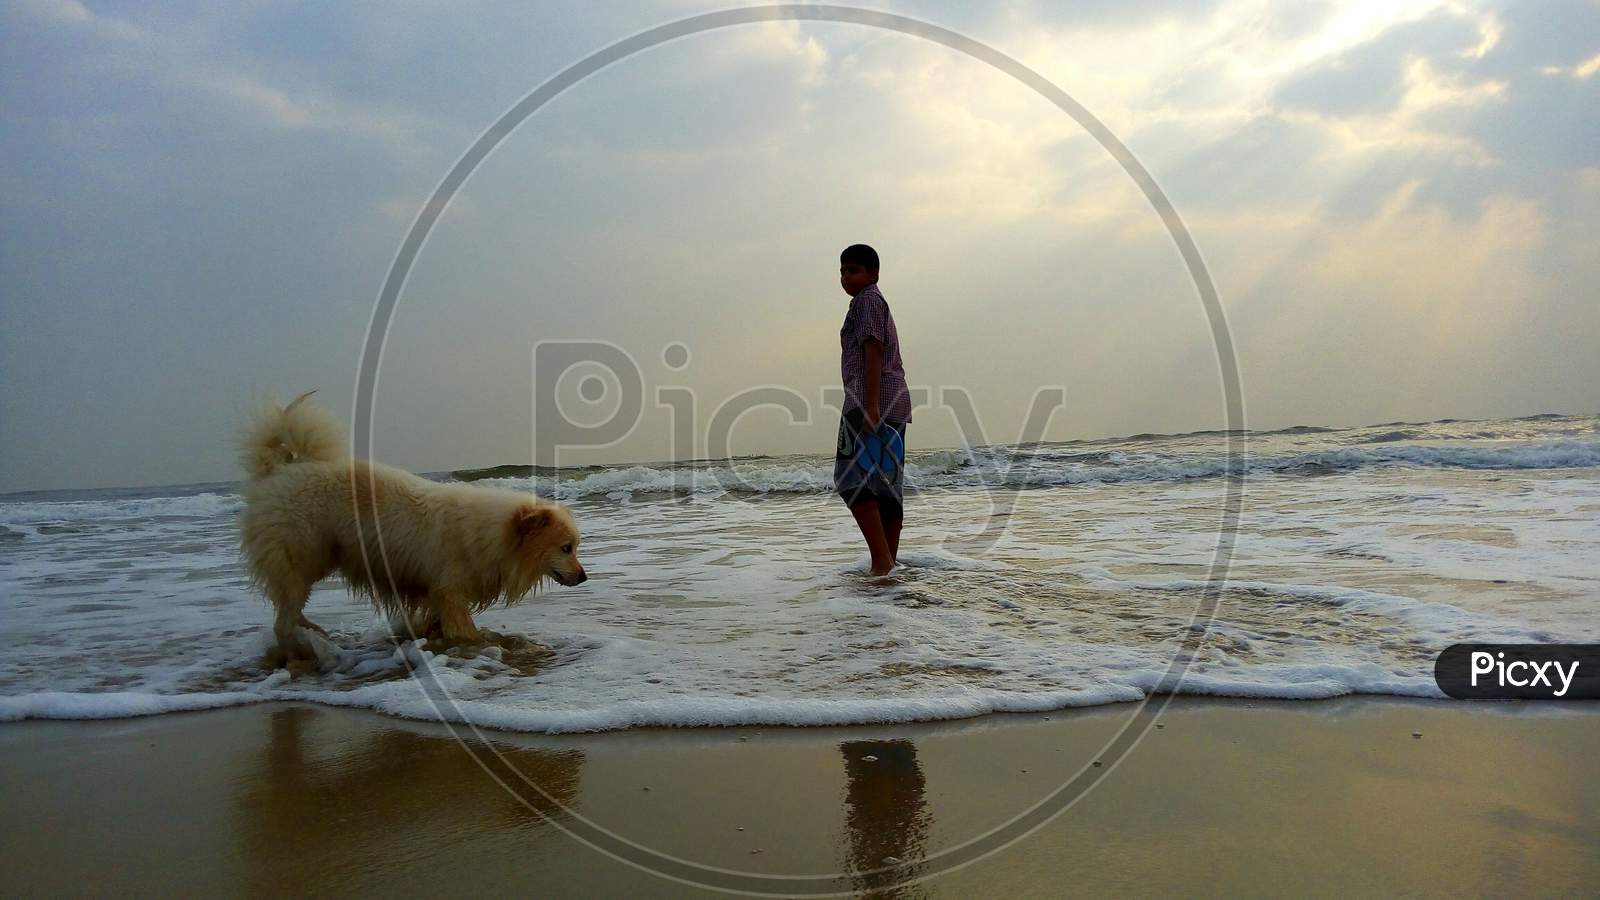 A boy with his pet dog playing near beach in the morning